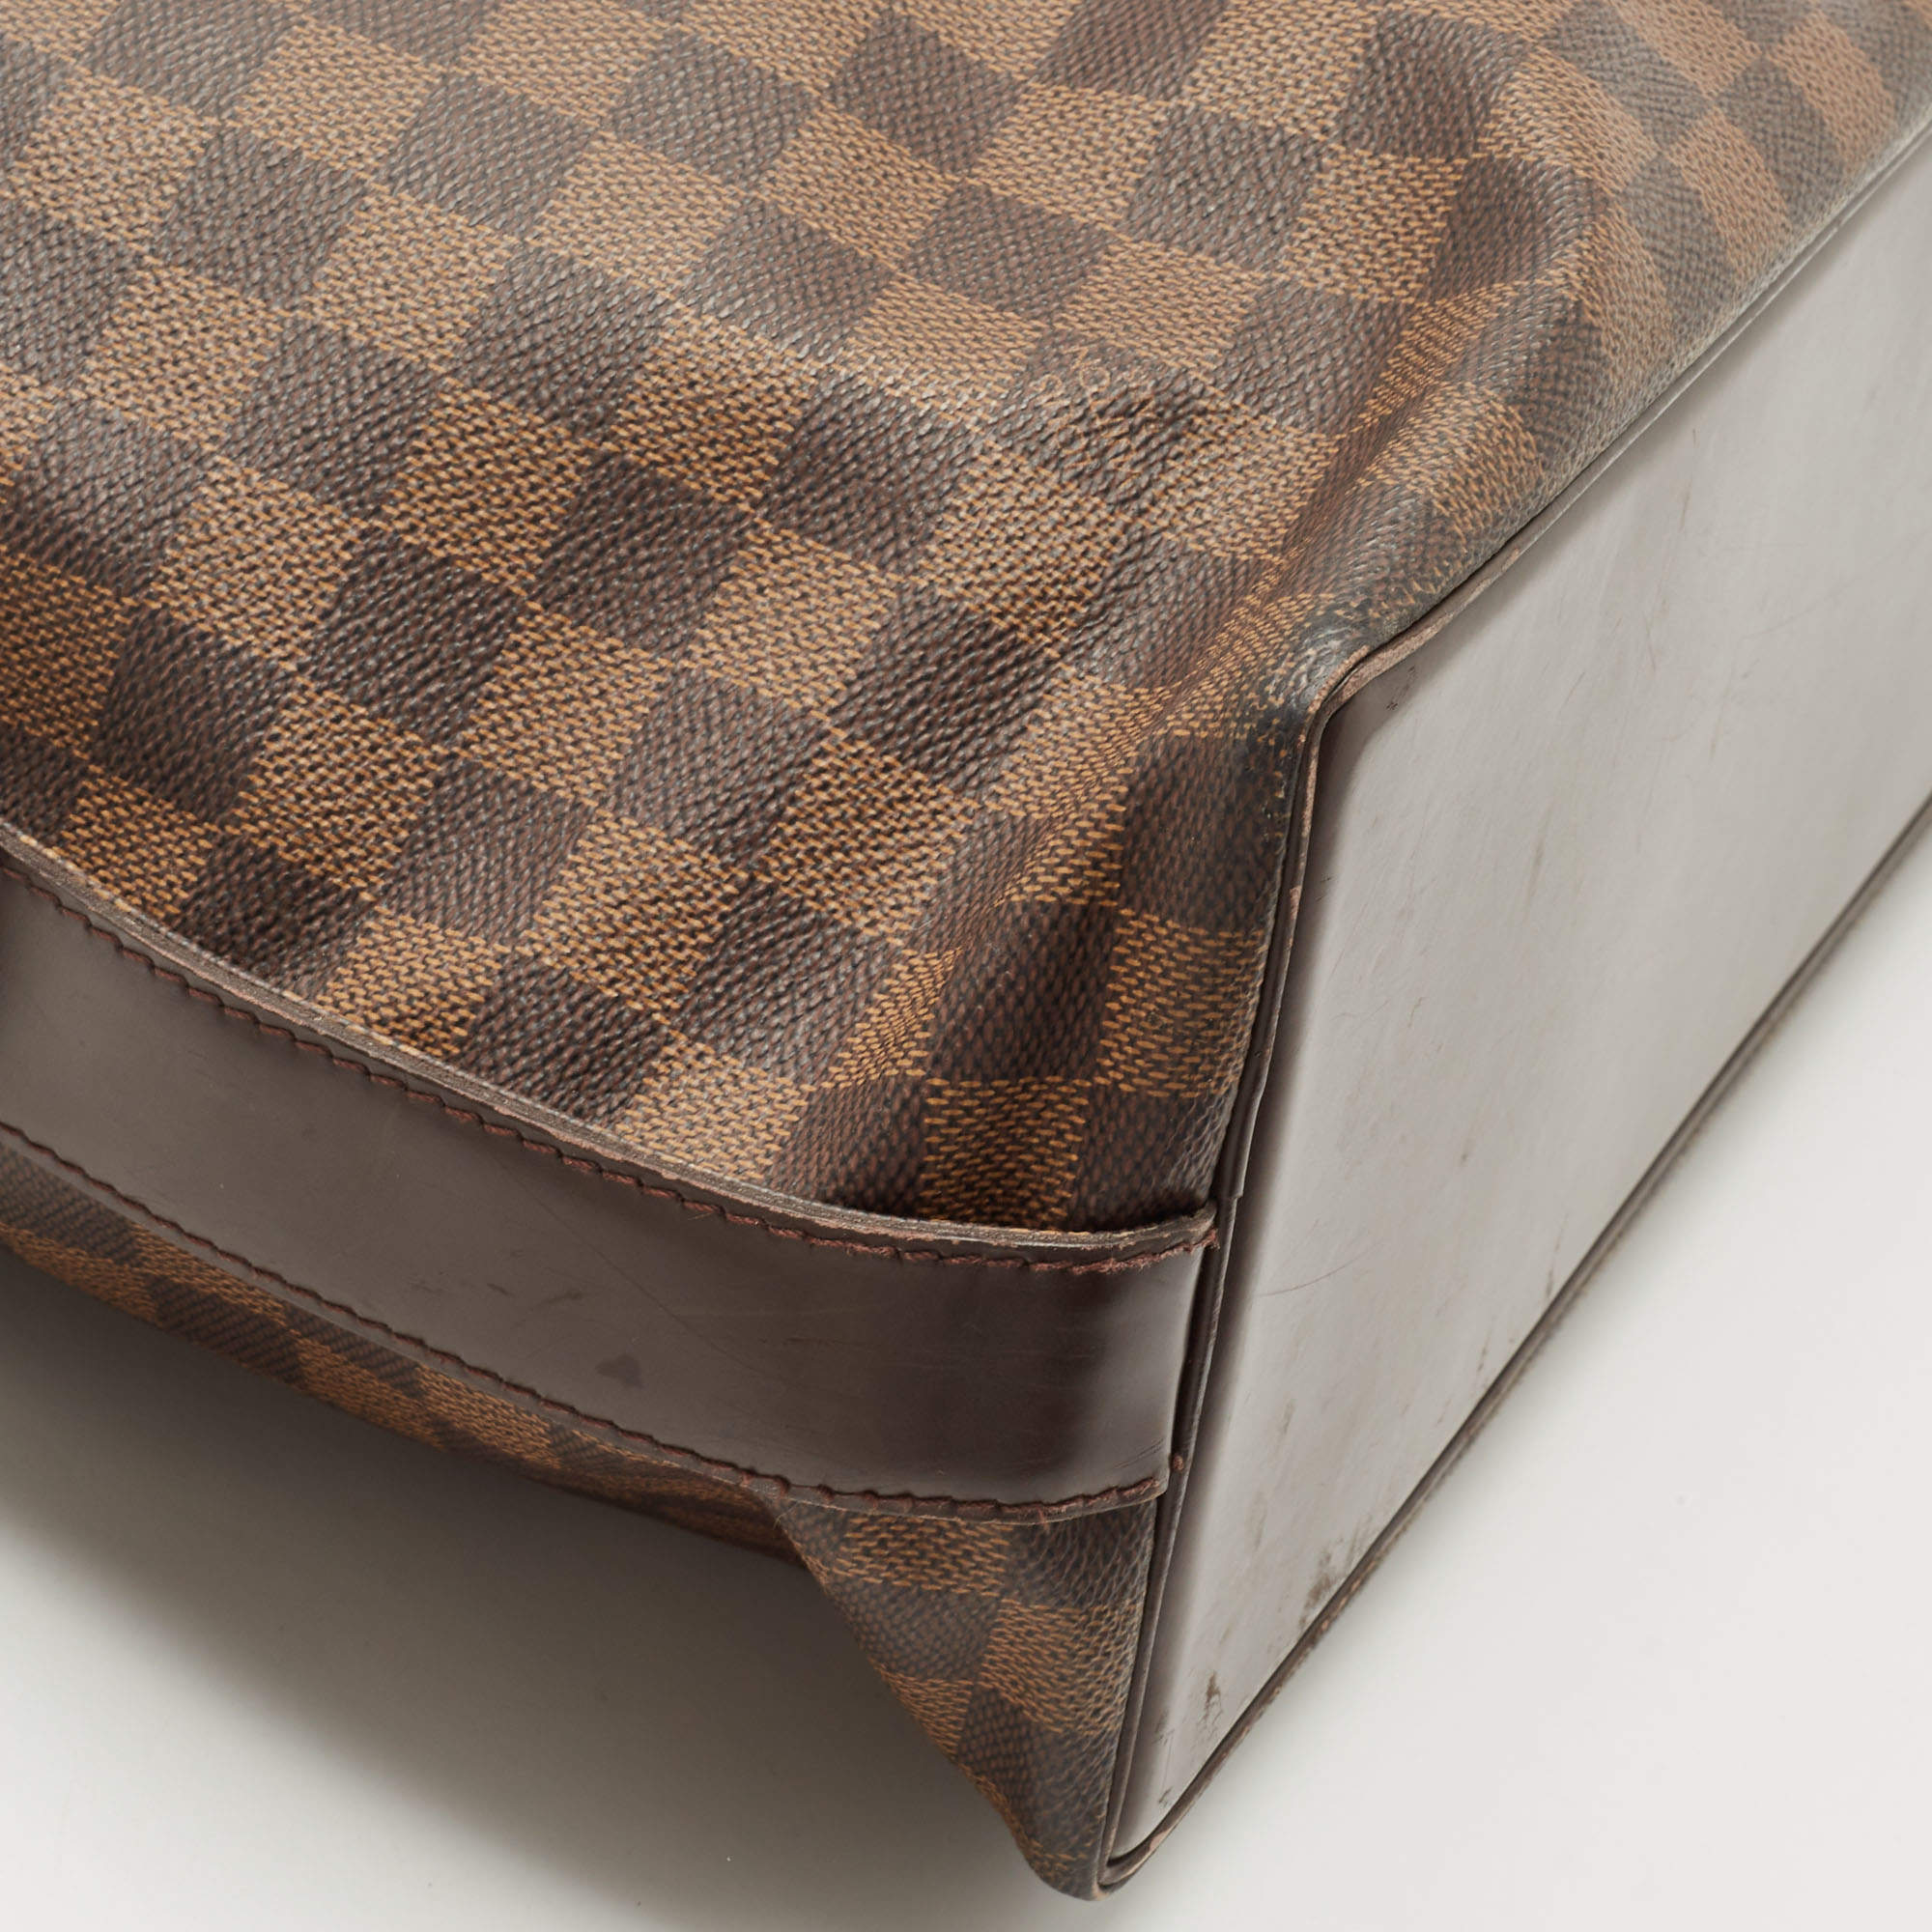 LOUIS VUITTON Damier Ebene Chelsea Tote - More Than You Can Imagine